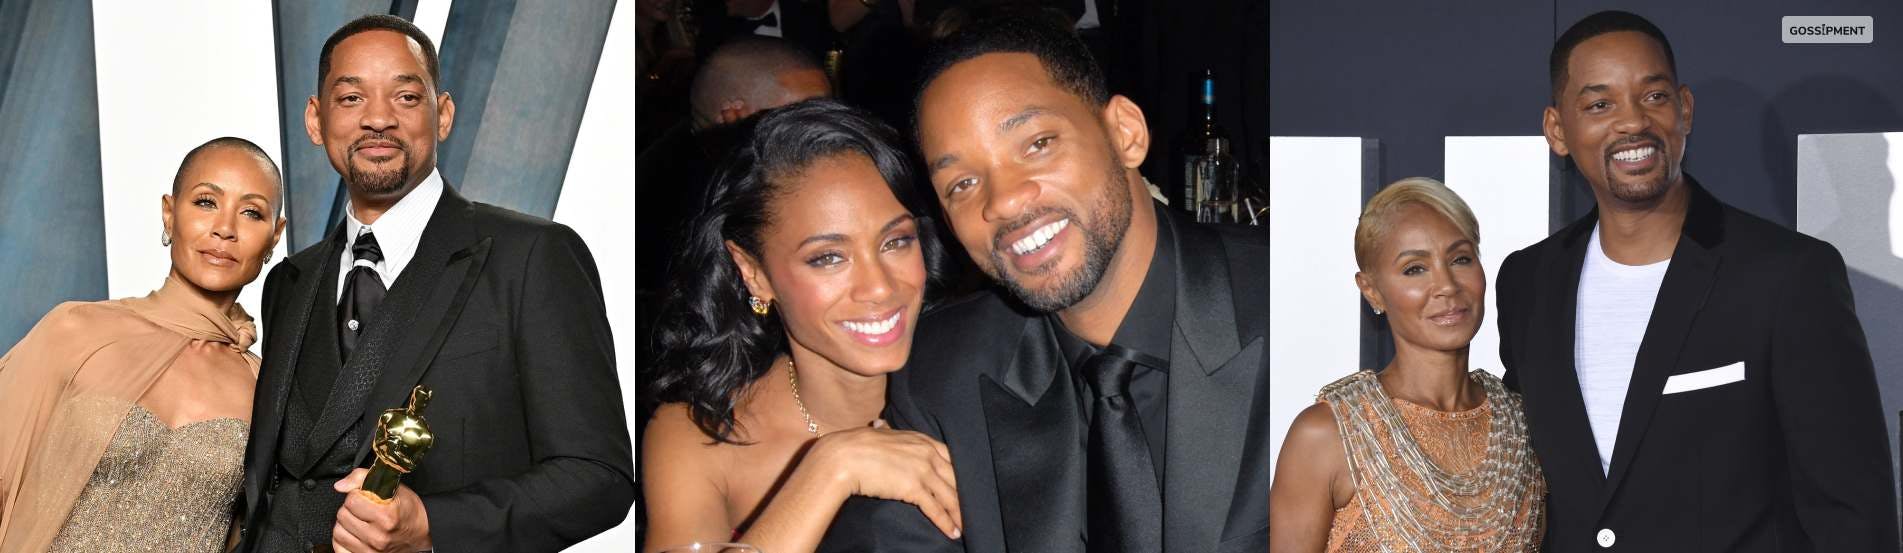 Cover Image for <strong>Will Smith Jada Pinkett Smith: A Complete Relationship Timeline</strong>